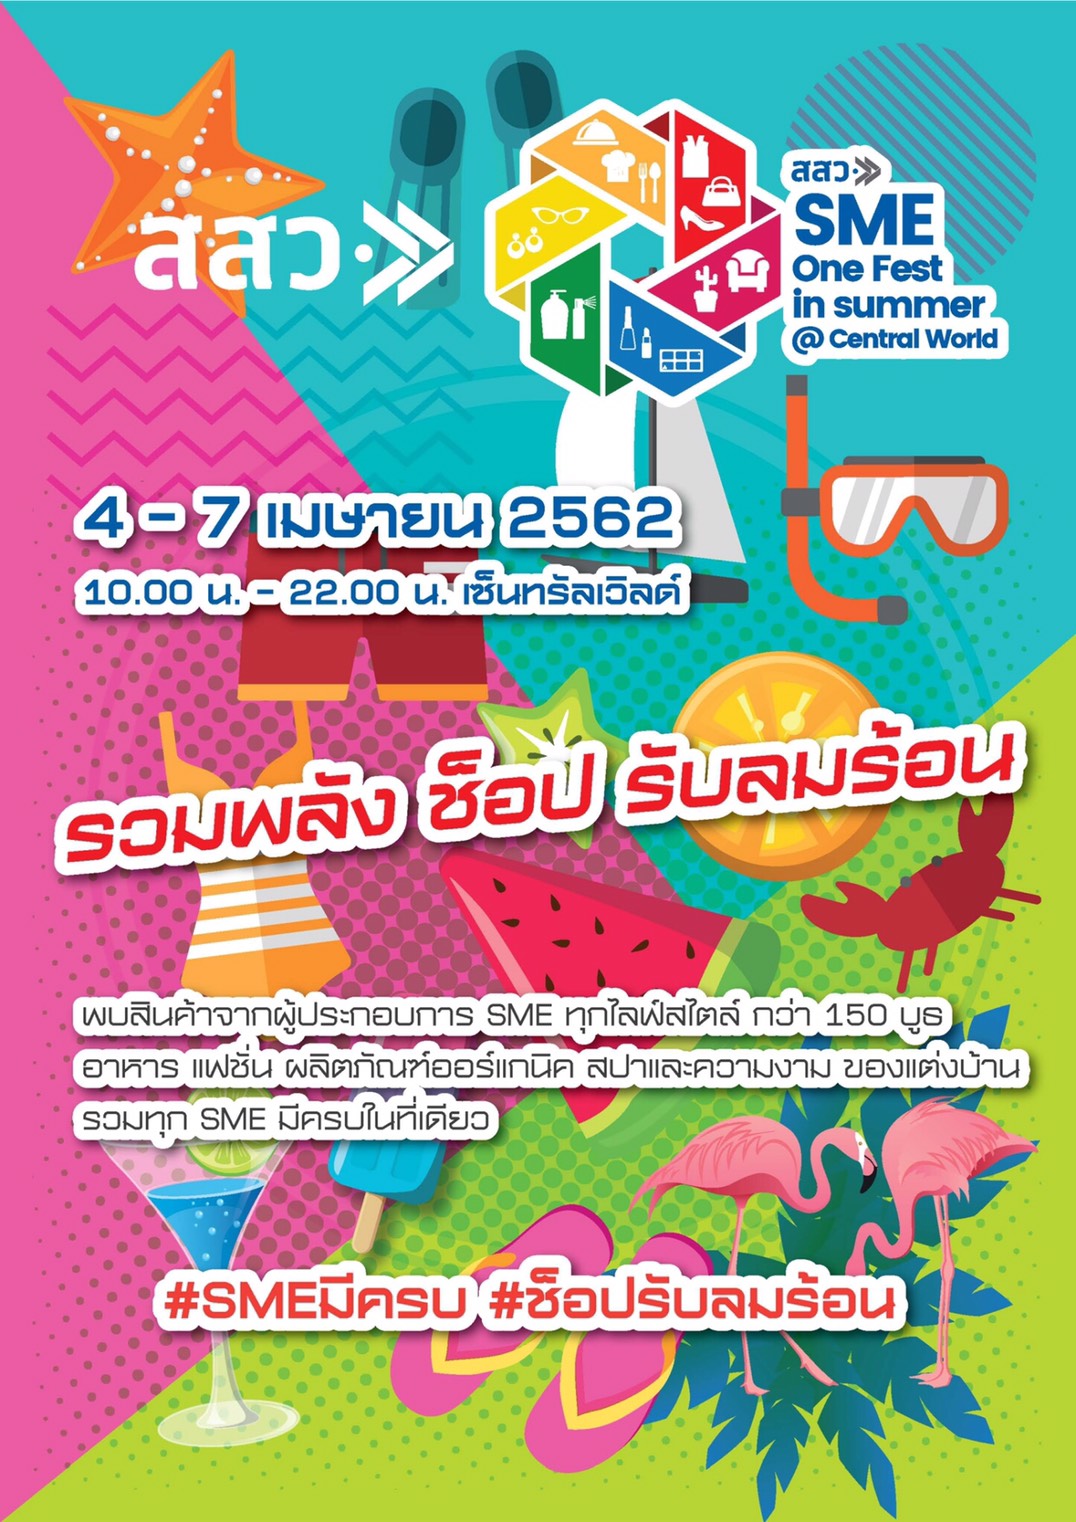 SME One Fest In Summer@Central World